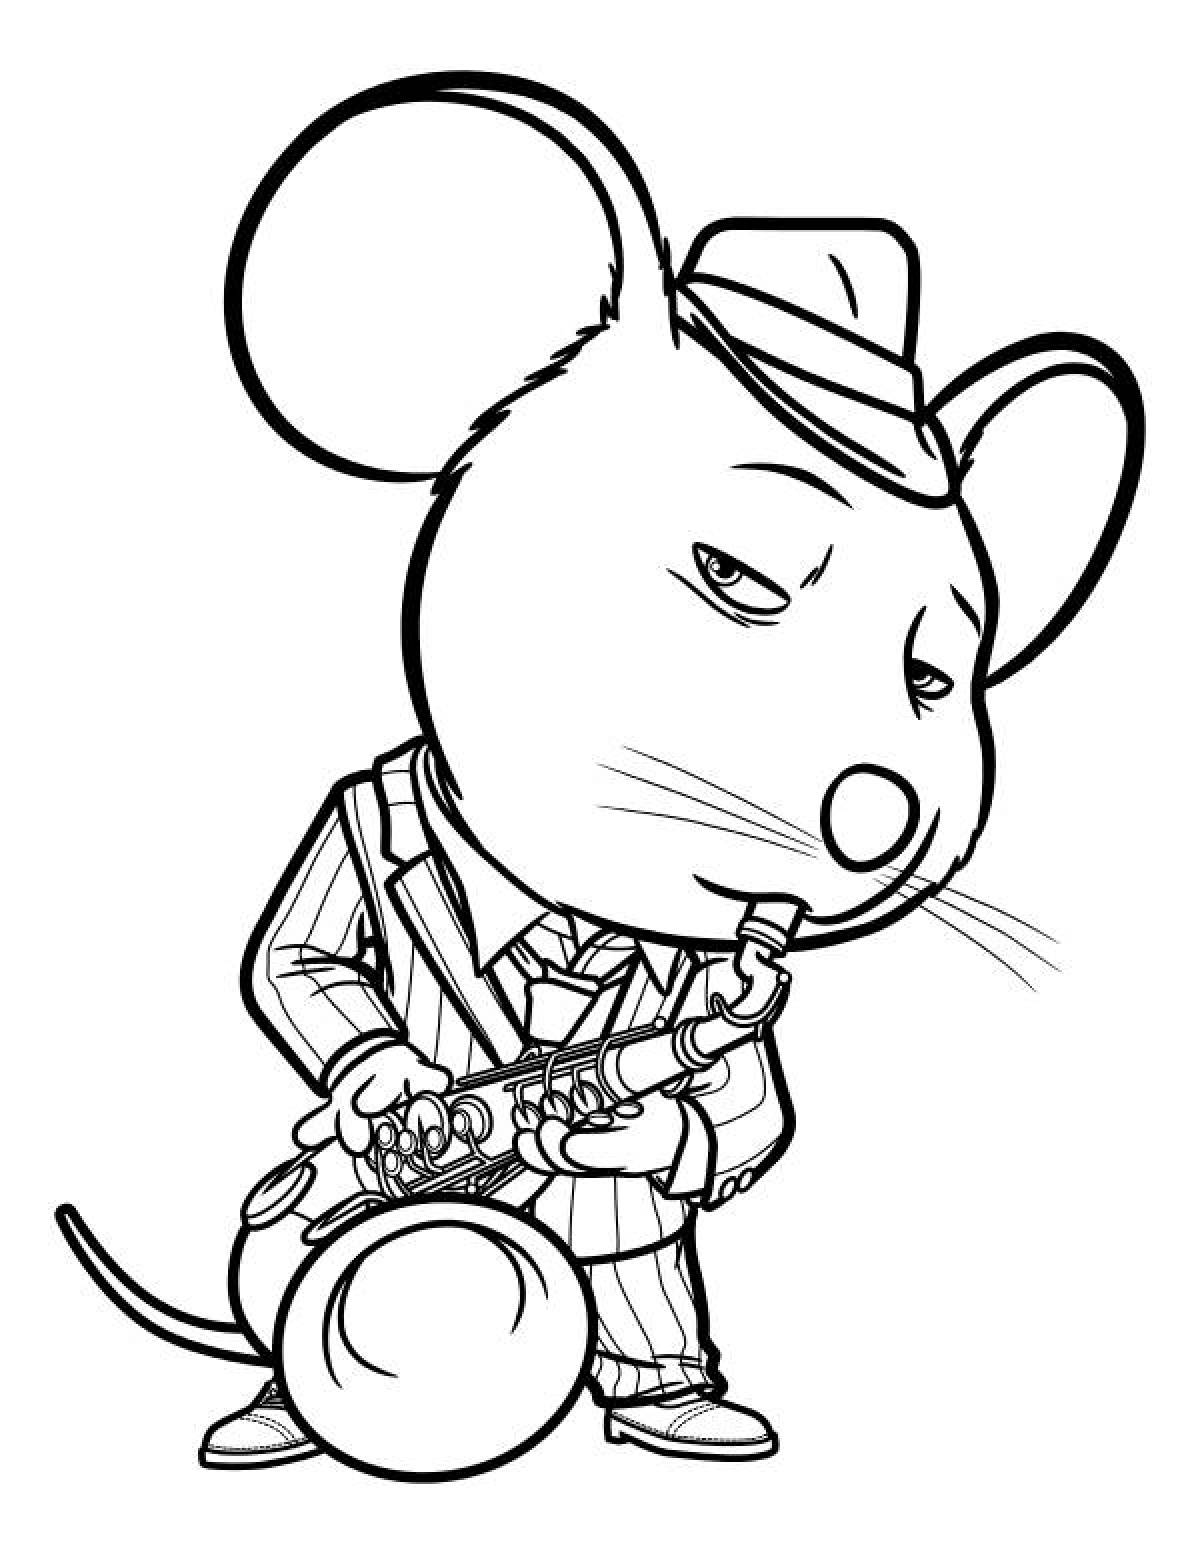 Mike mouse